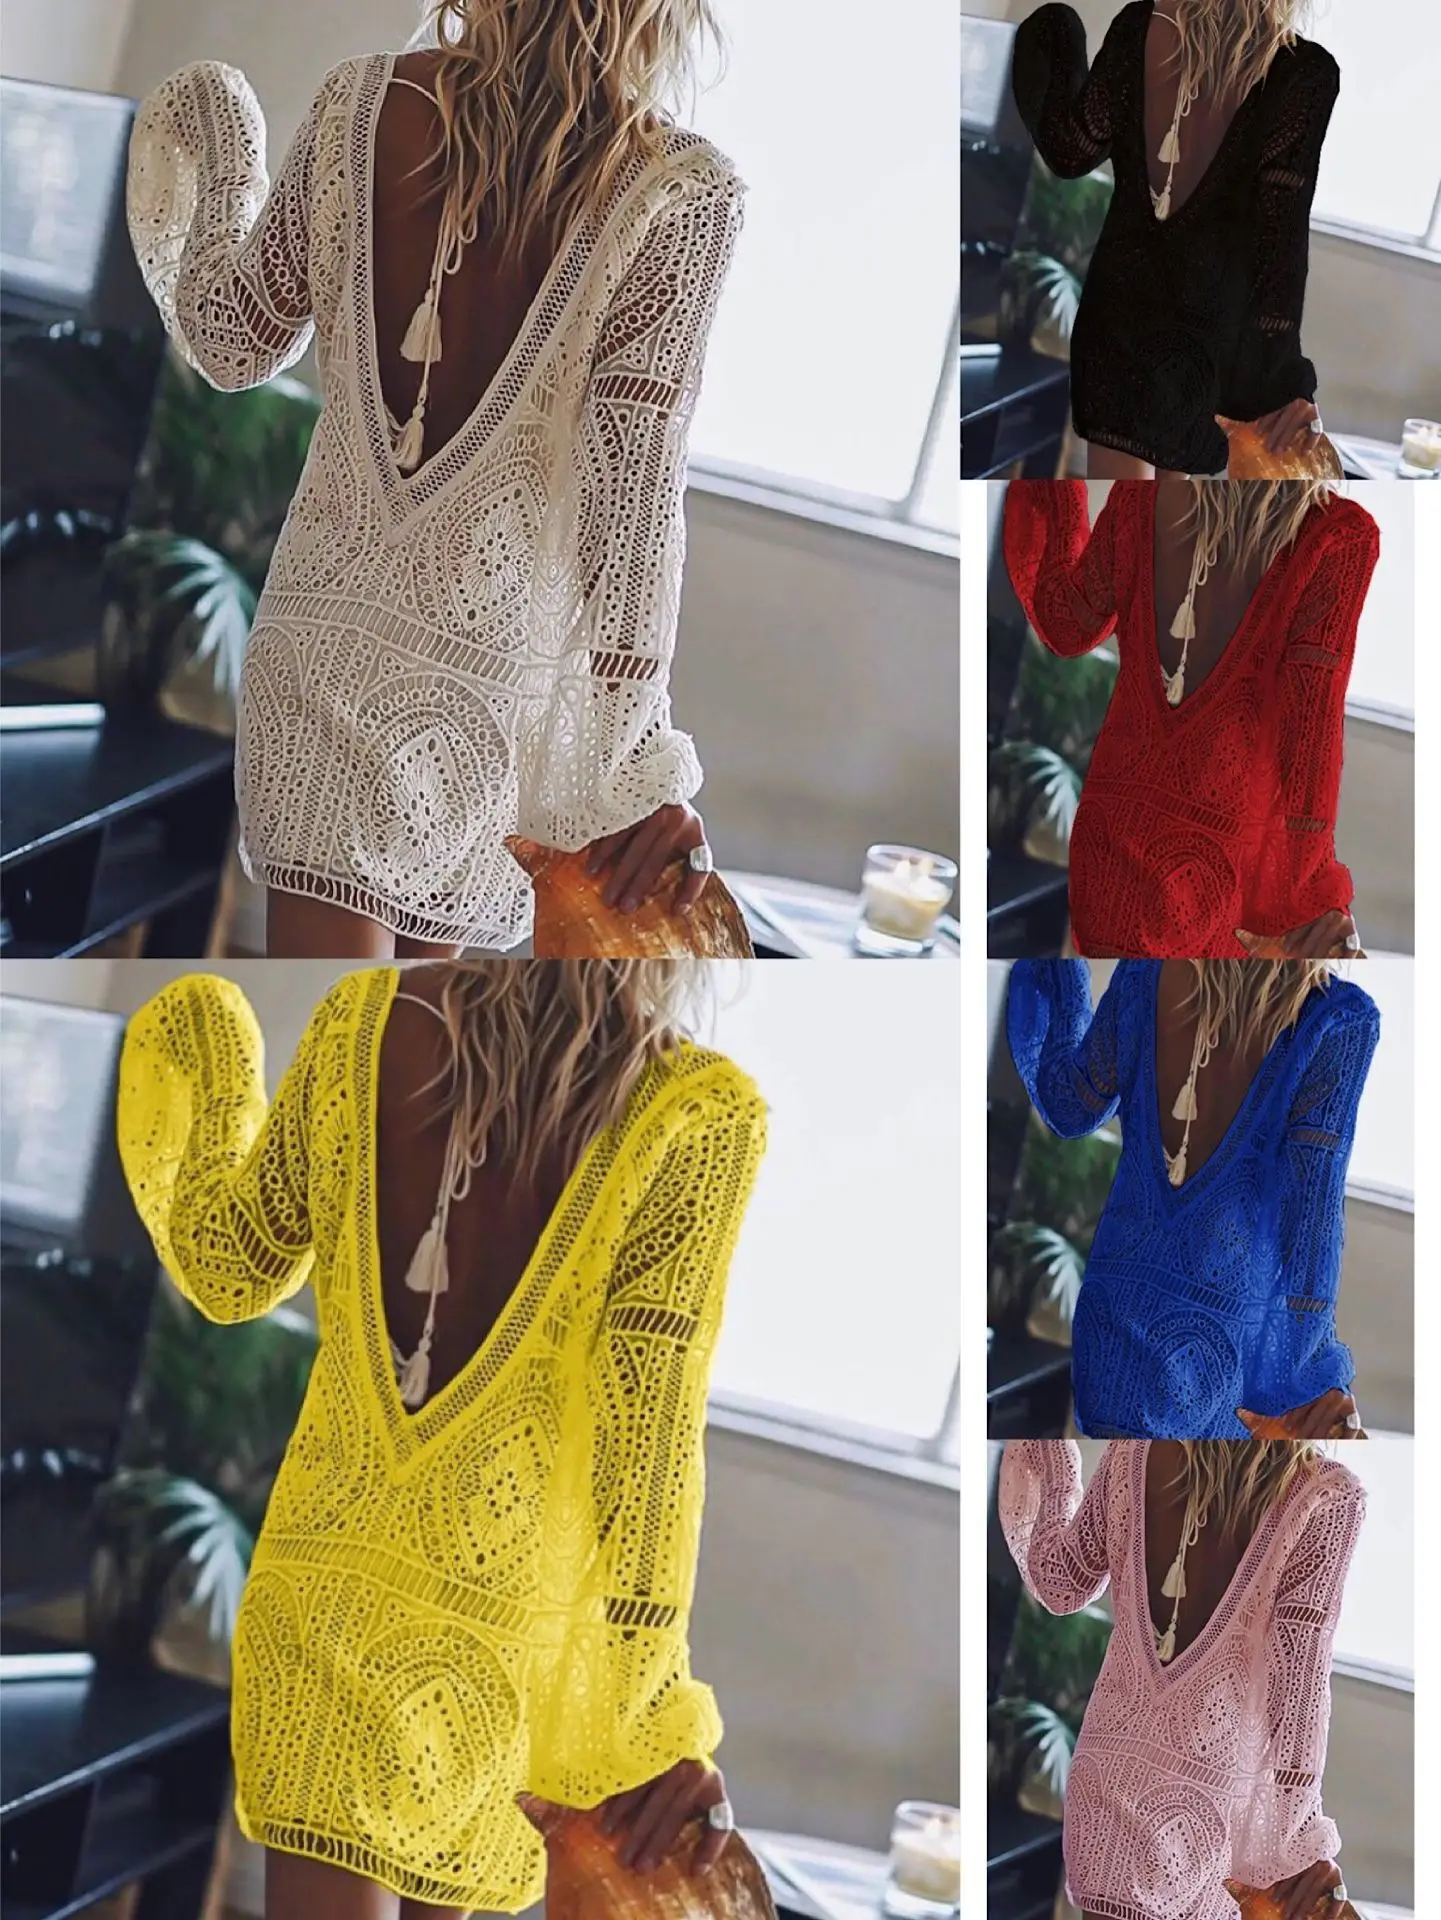 

Summer Dress for Women See Through Hollow Sexy Mini Dresses Long Sleeve Backless V-Neck Lace Dress Loose Bohemian Beach Smock